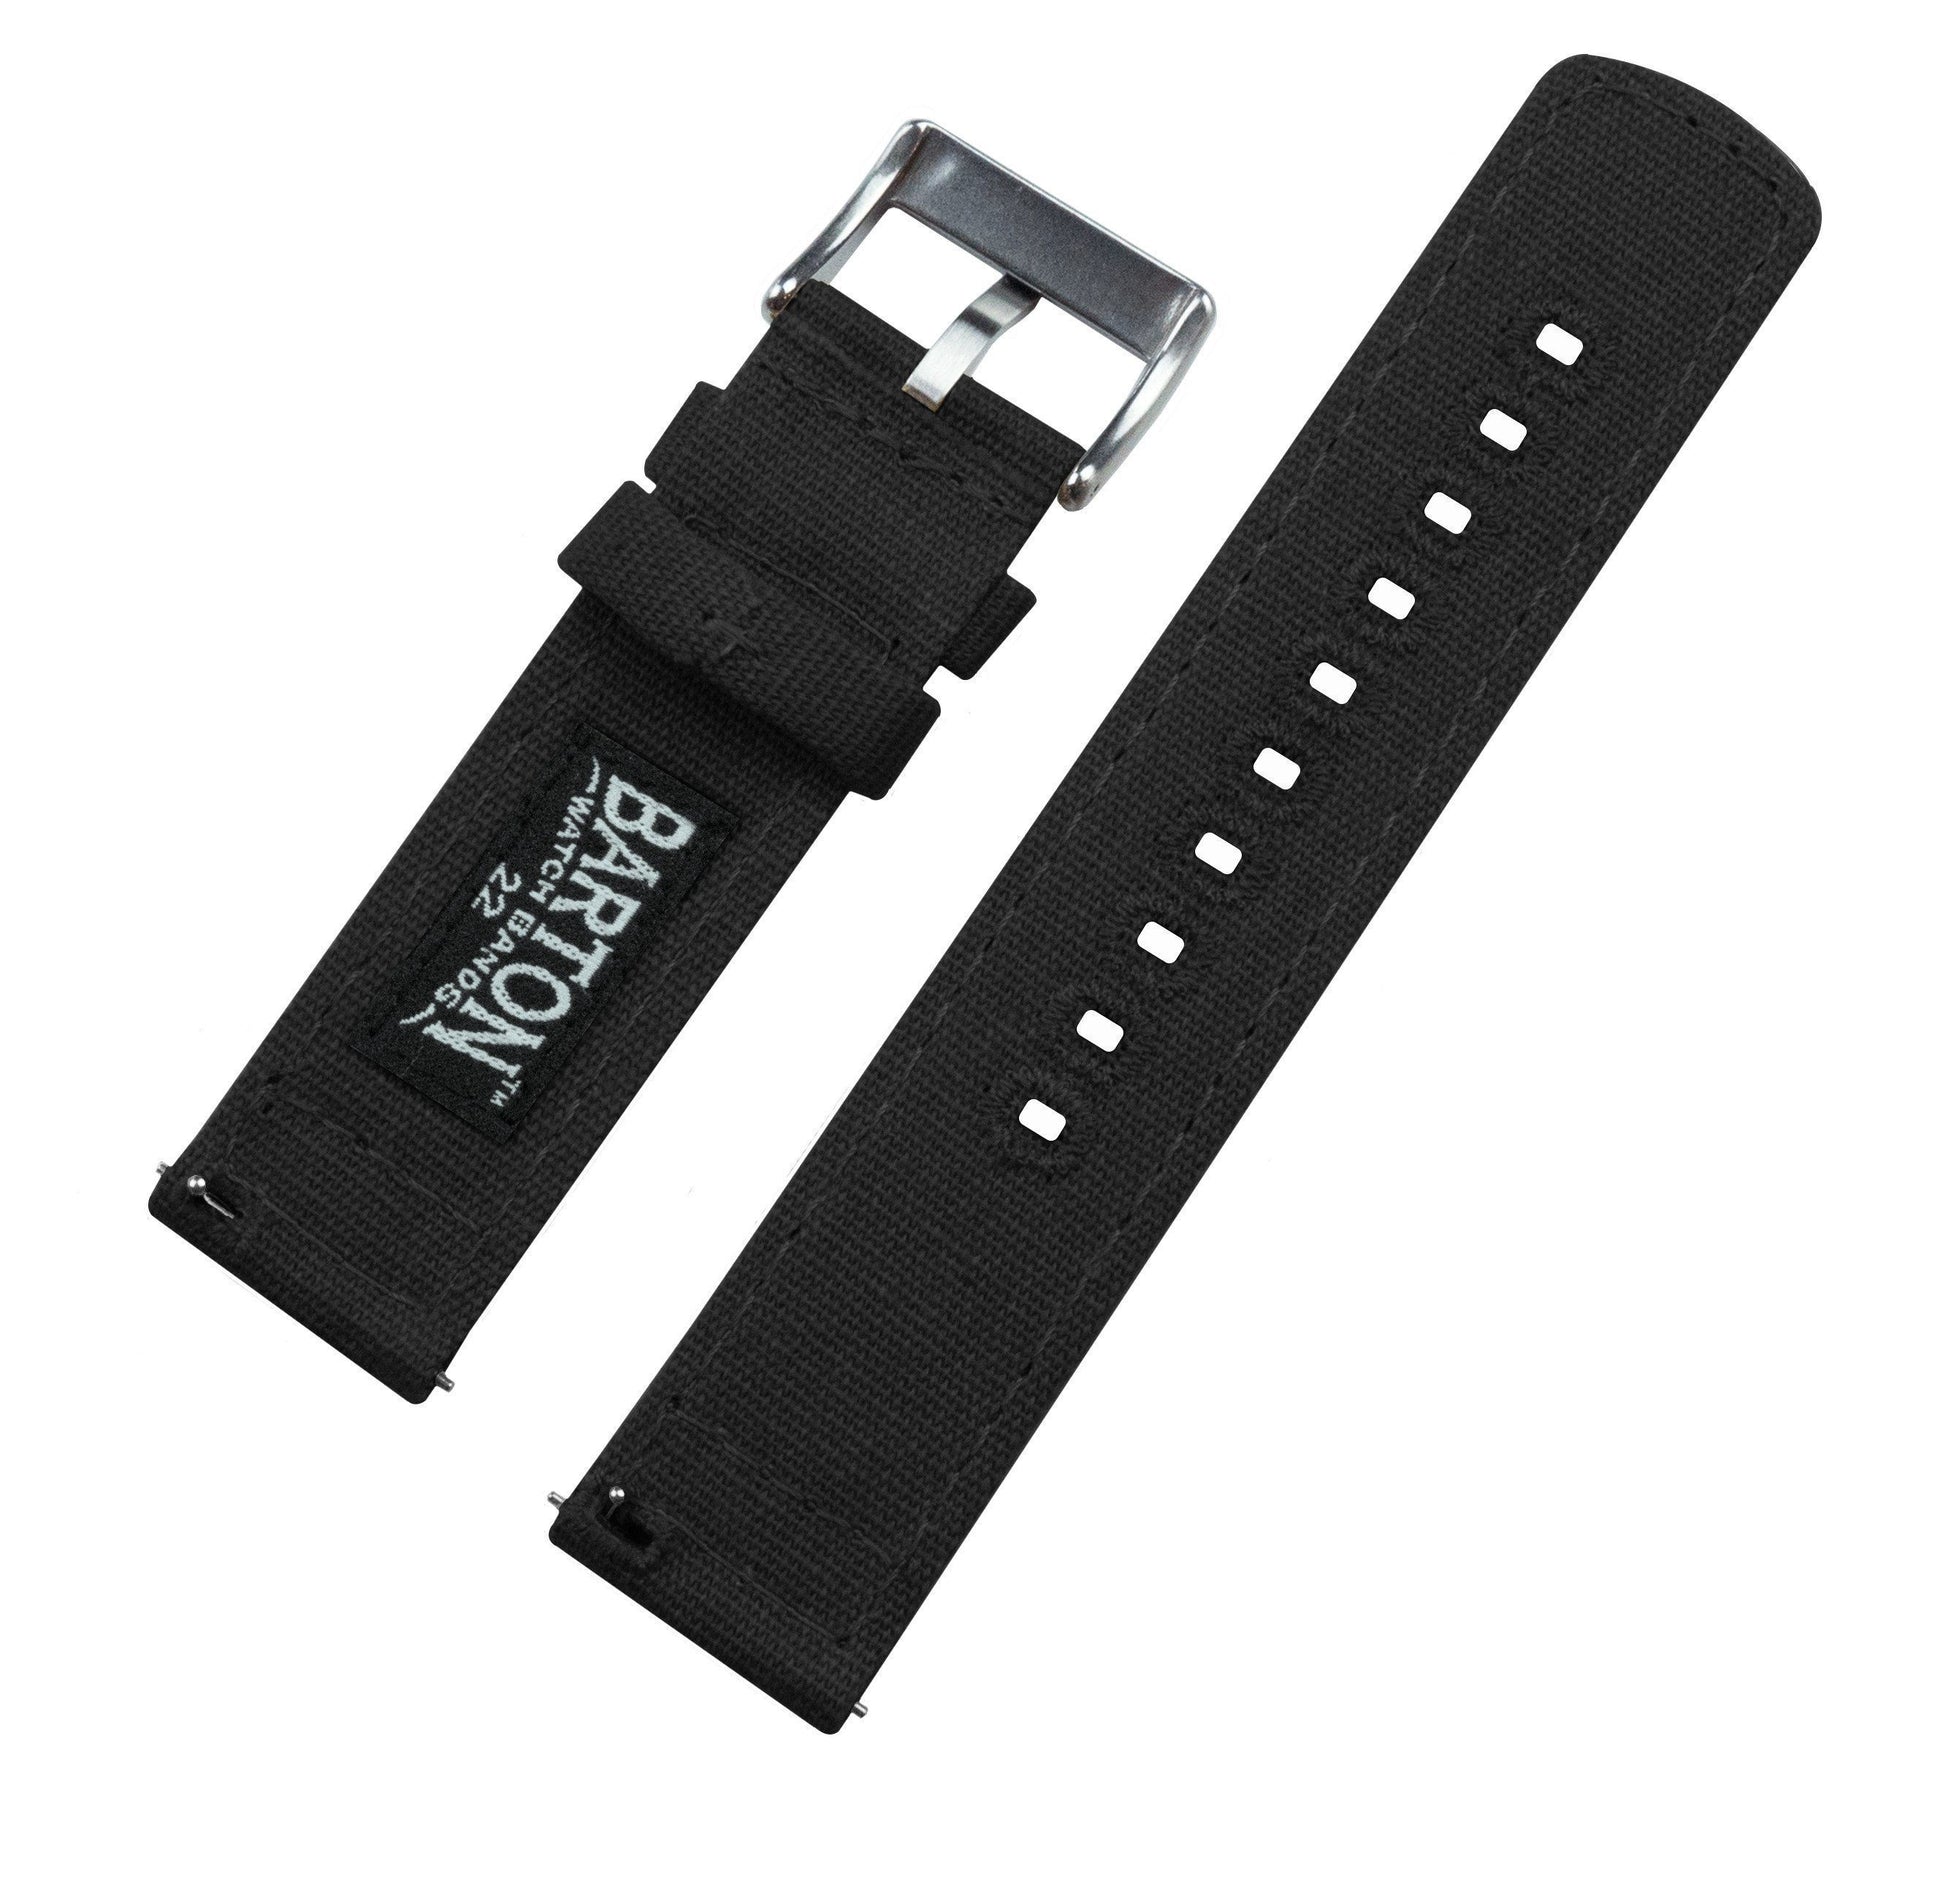 Withings Nokia Activité and Steel HR | Black Canvas - Barton Watch Bands